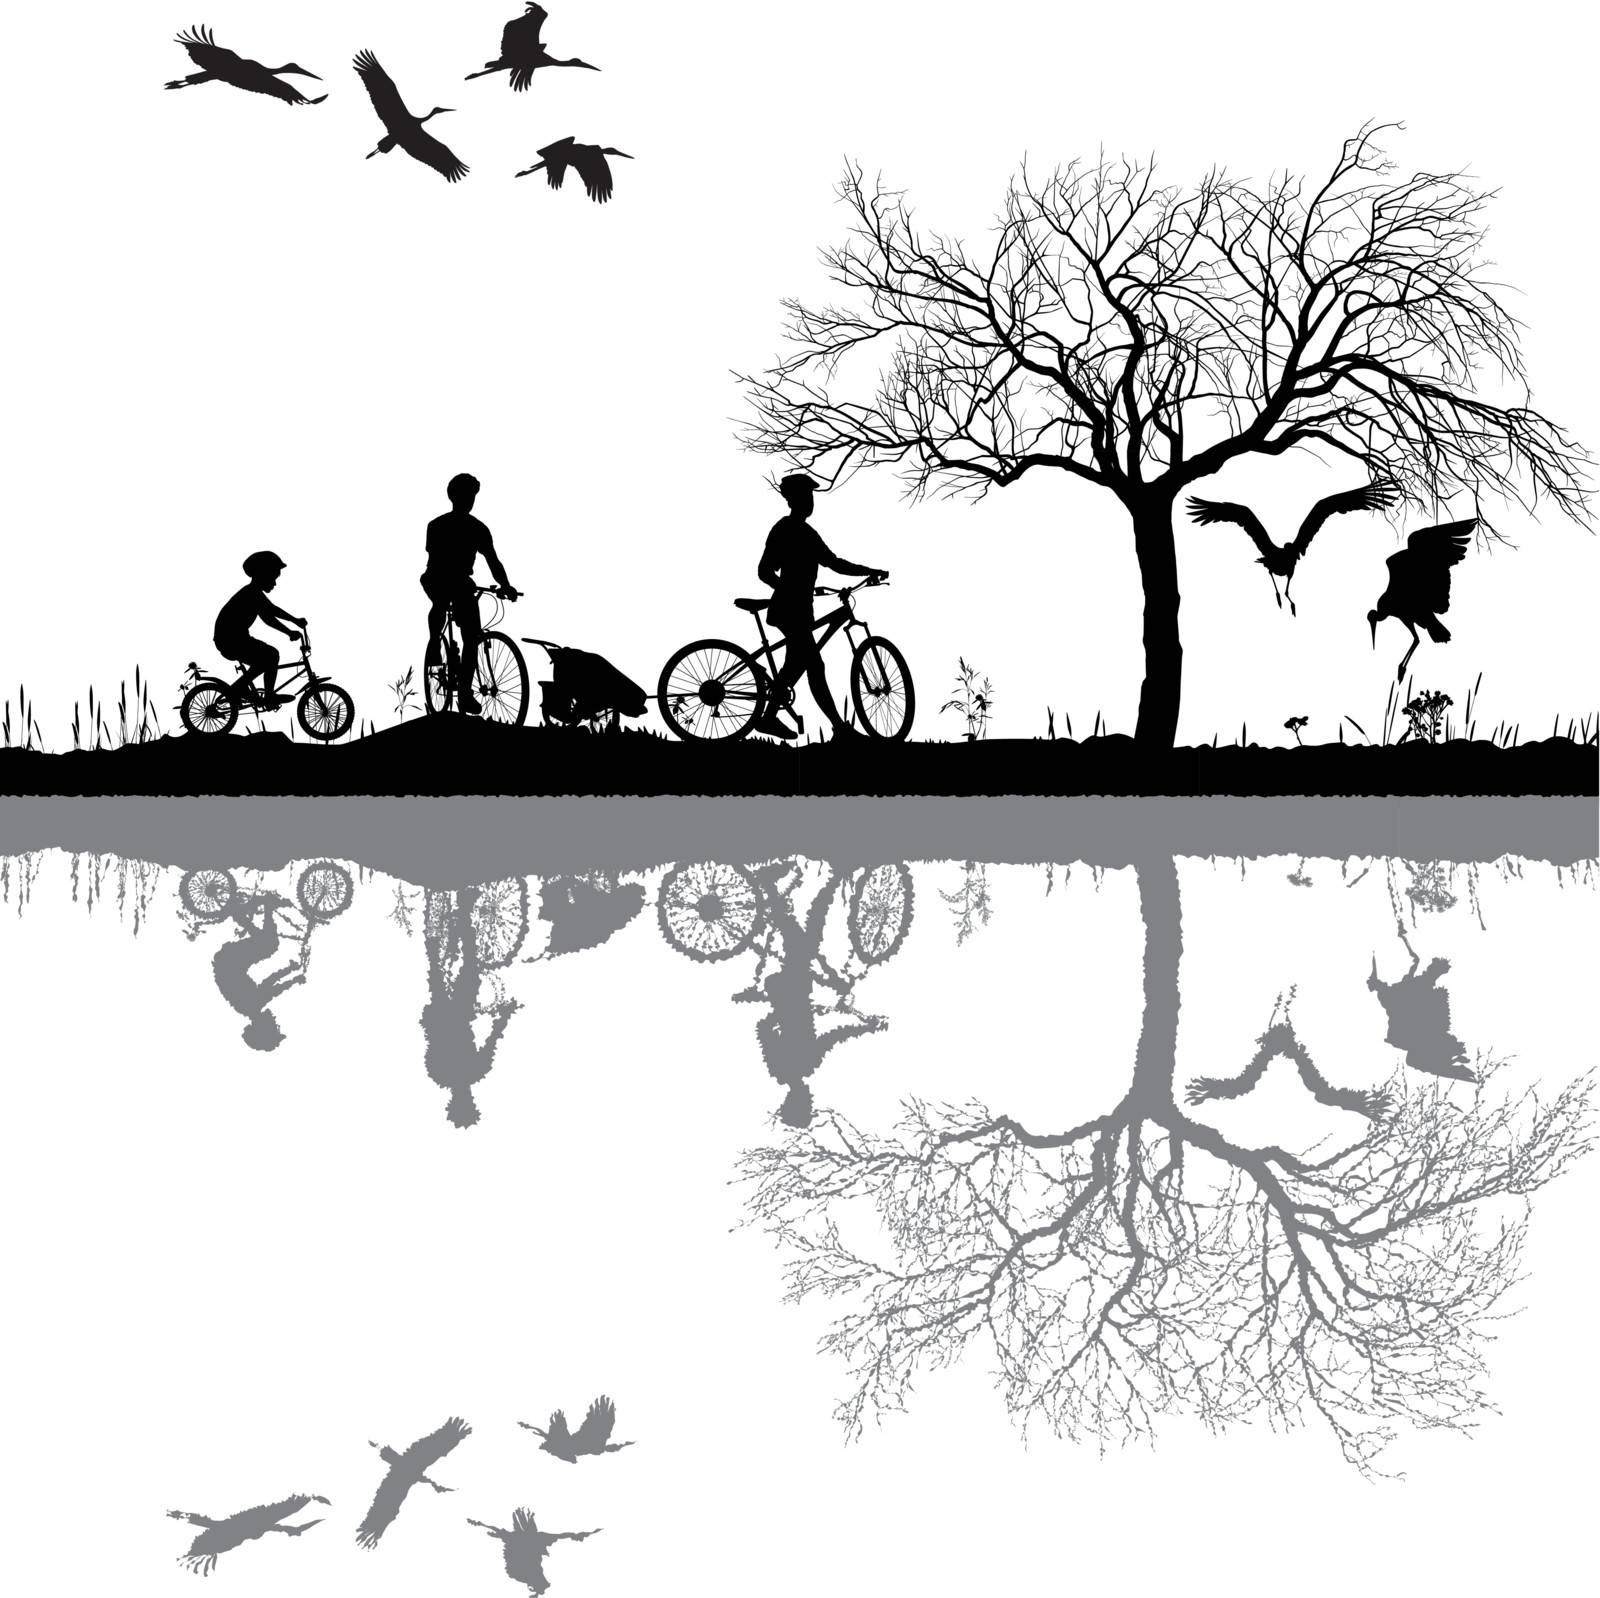 Illustration of a family on bicycles and their reflection in water